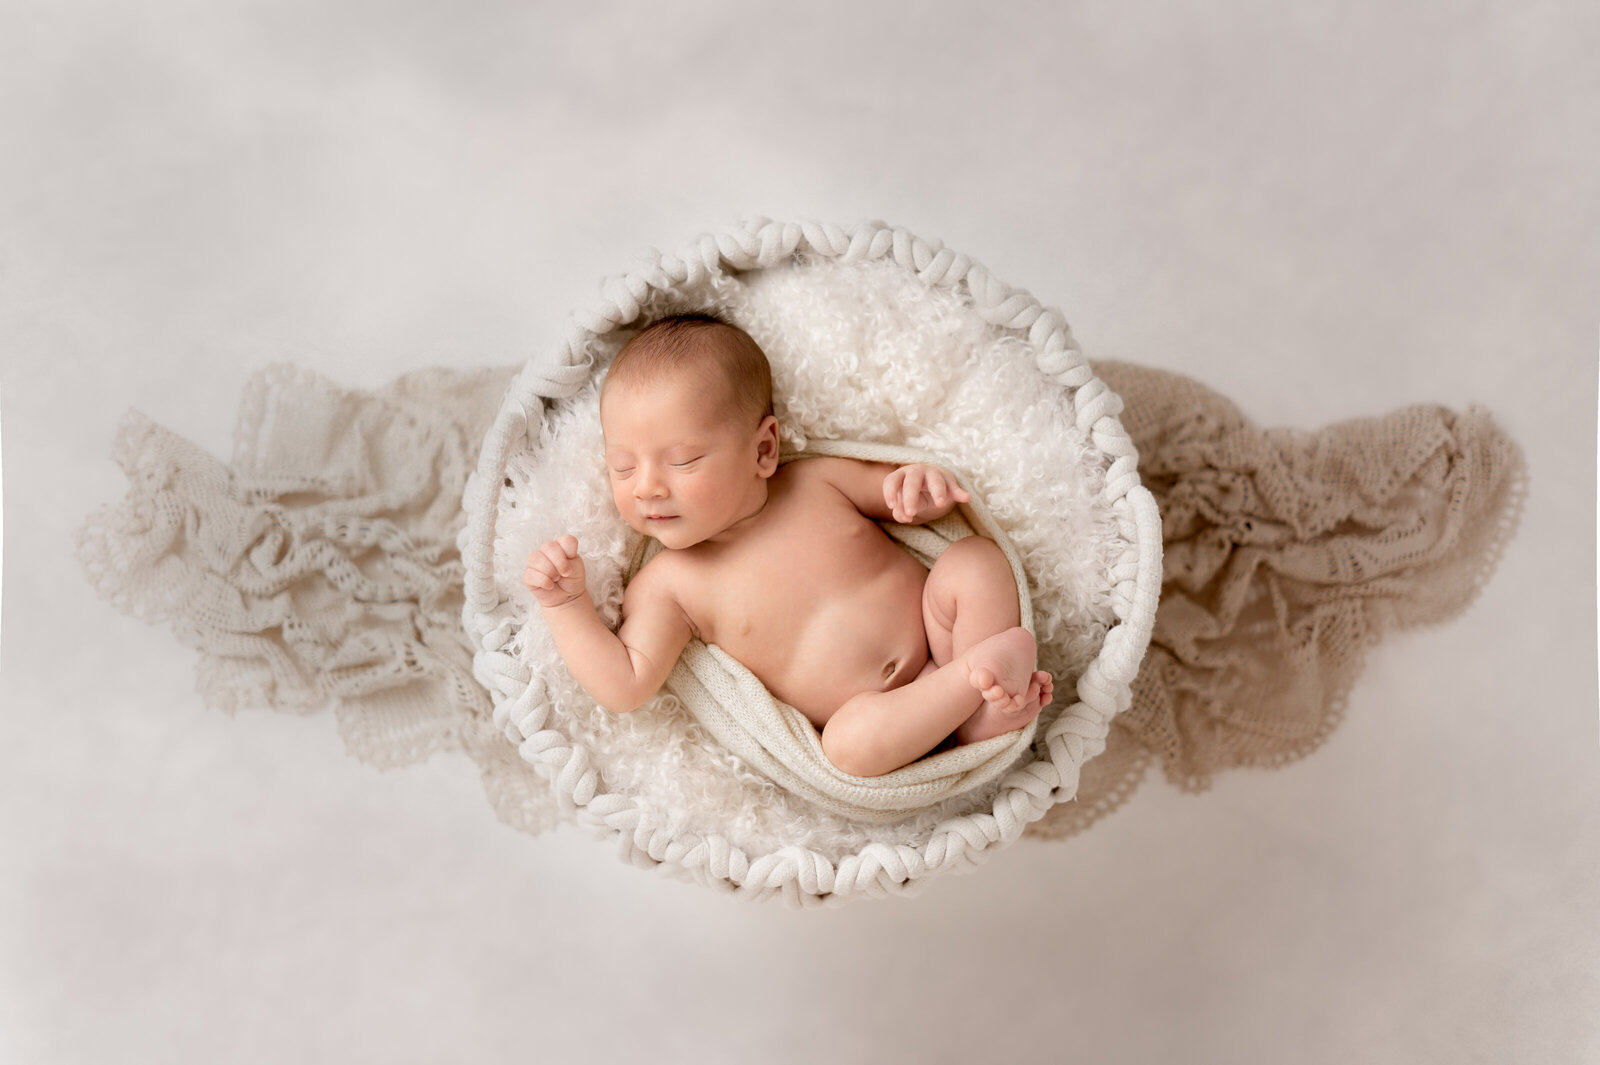 Why invest in a maternity photography session? — Newborn